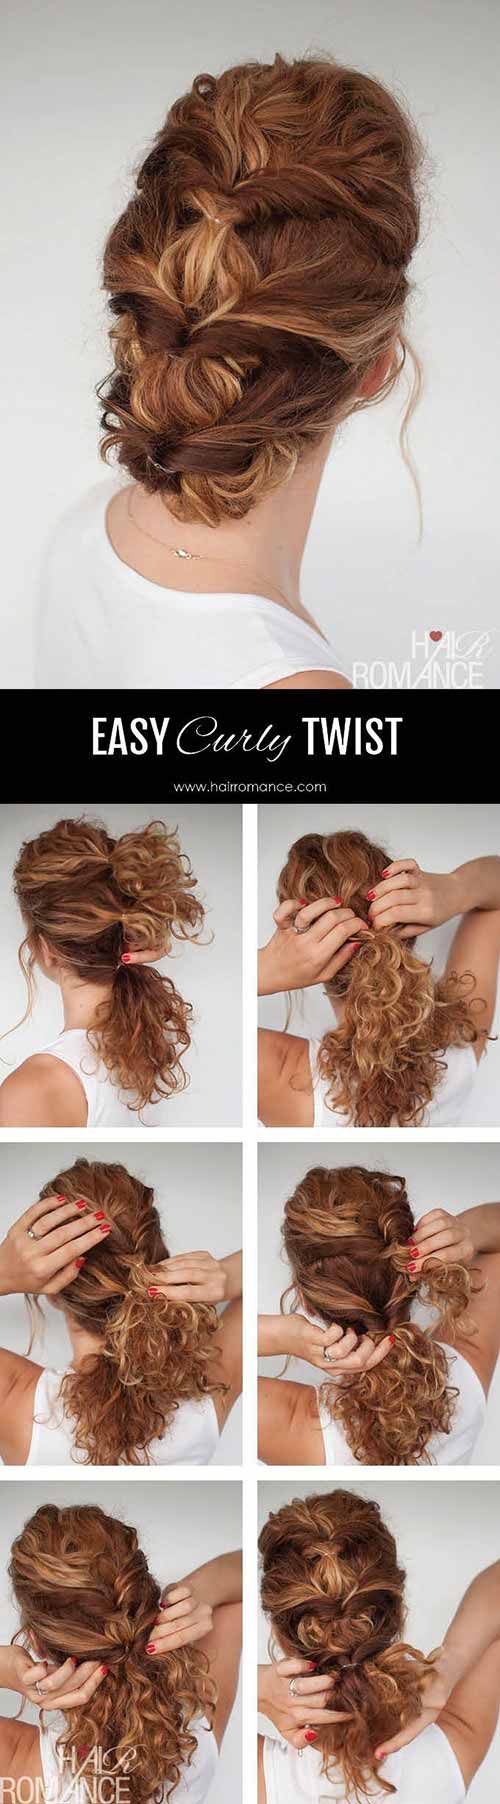 Easy curly twisted updo for curly hair